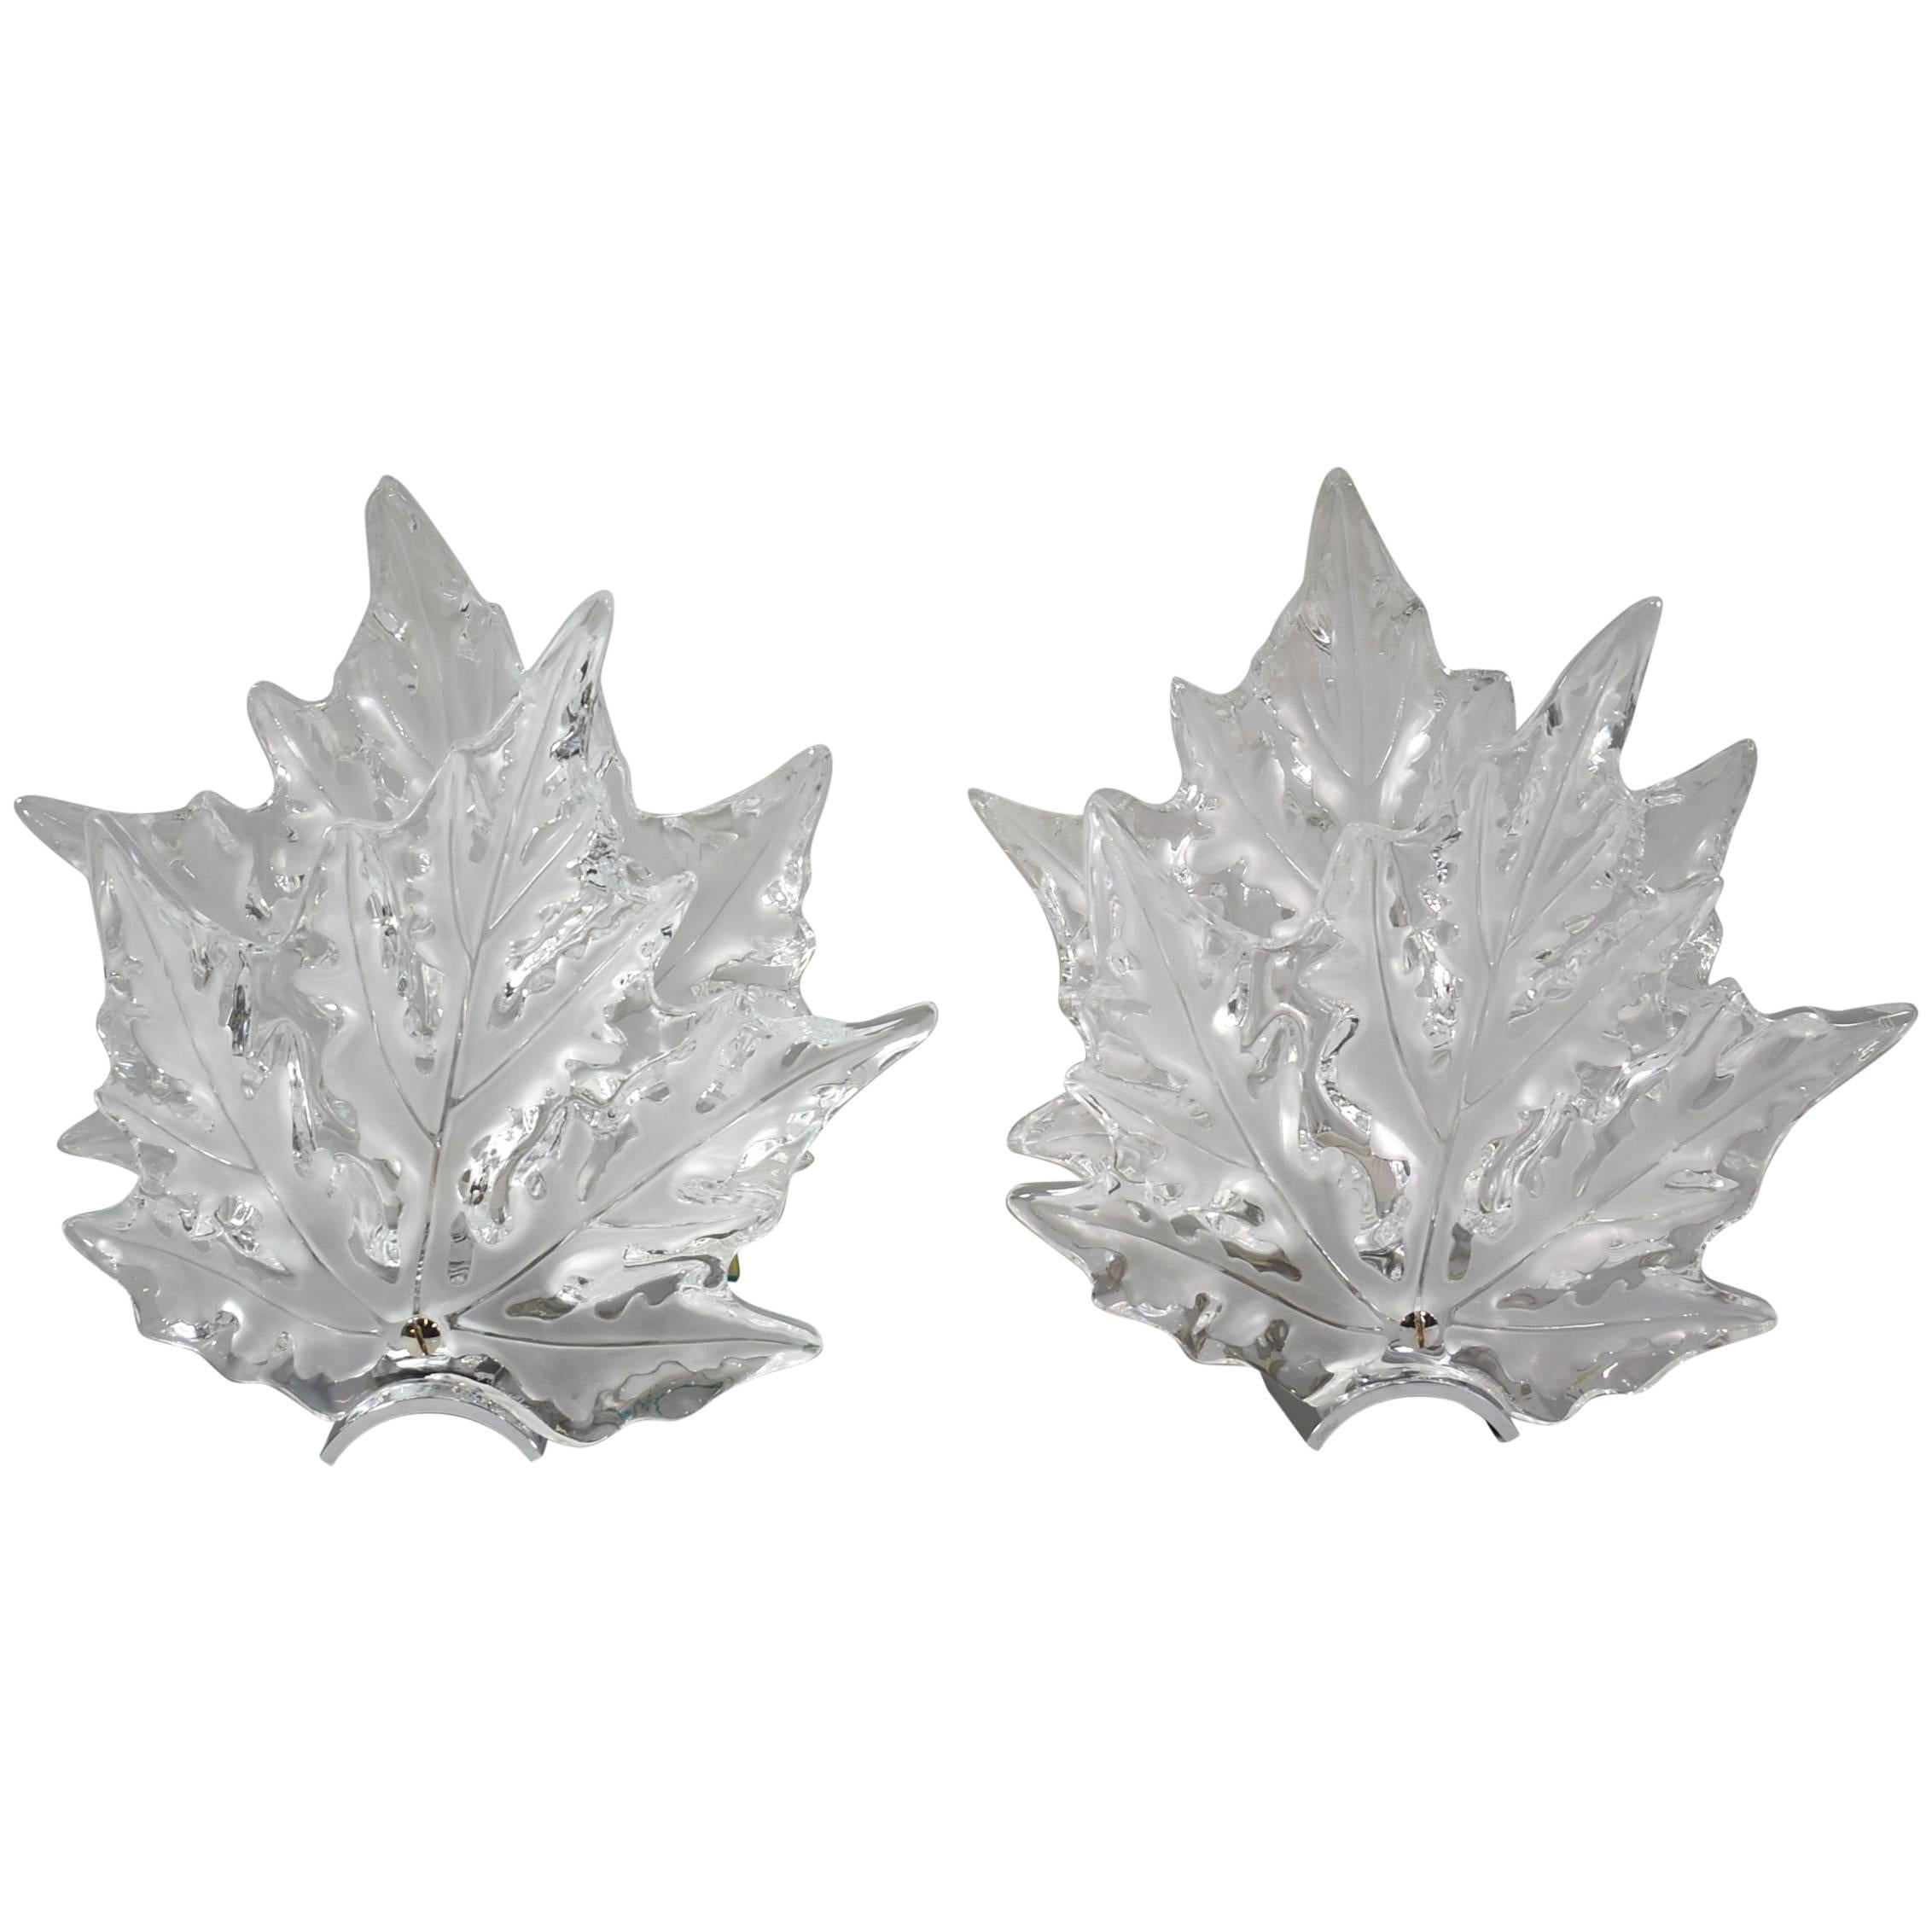 Pair of Crystal Lalique Champs Elysees Wall Sconces